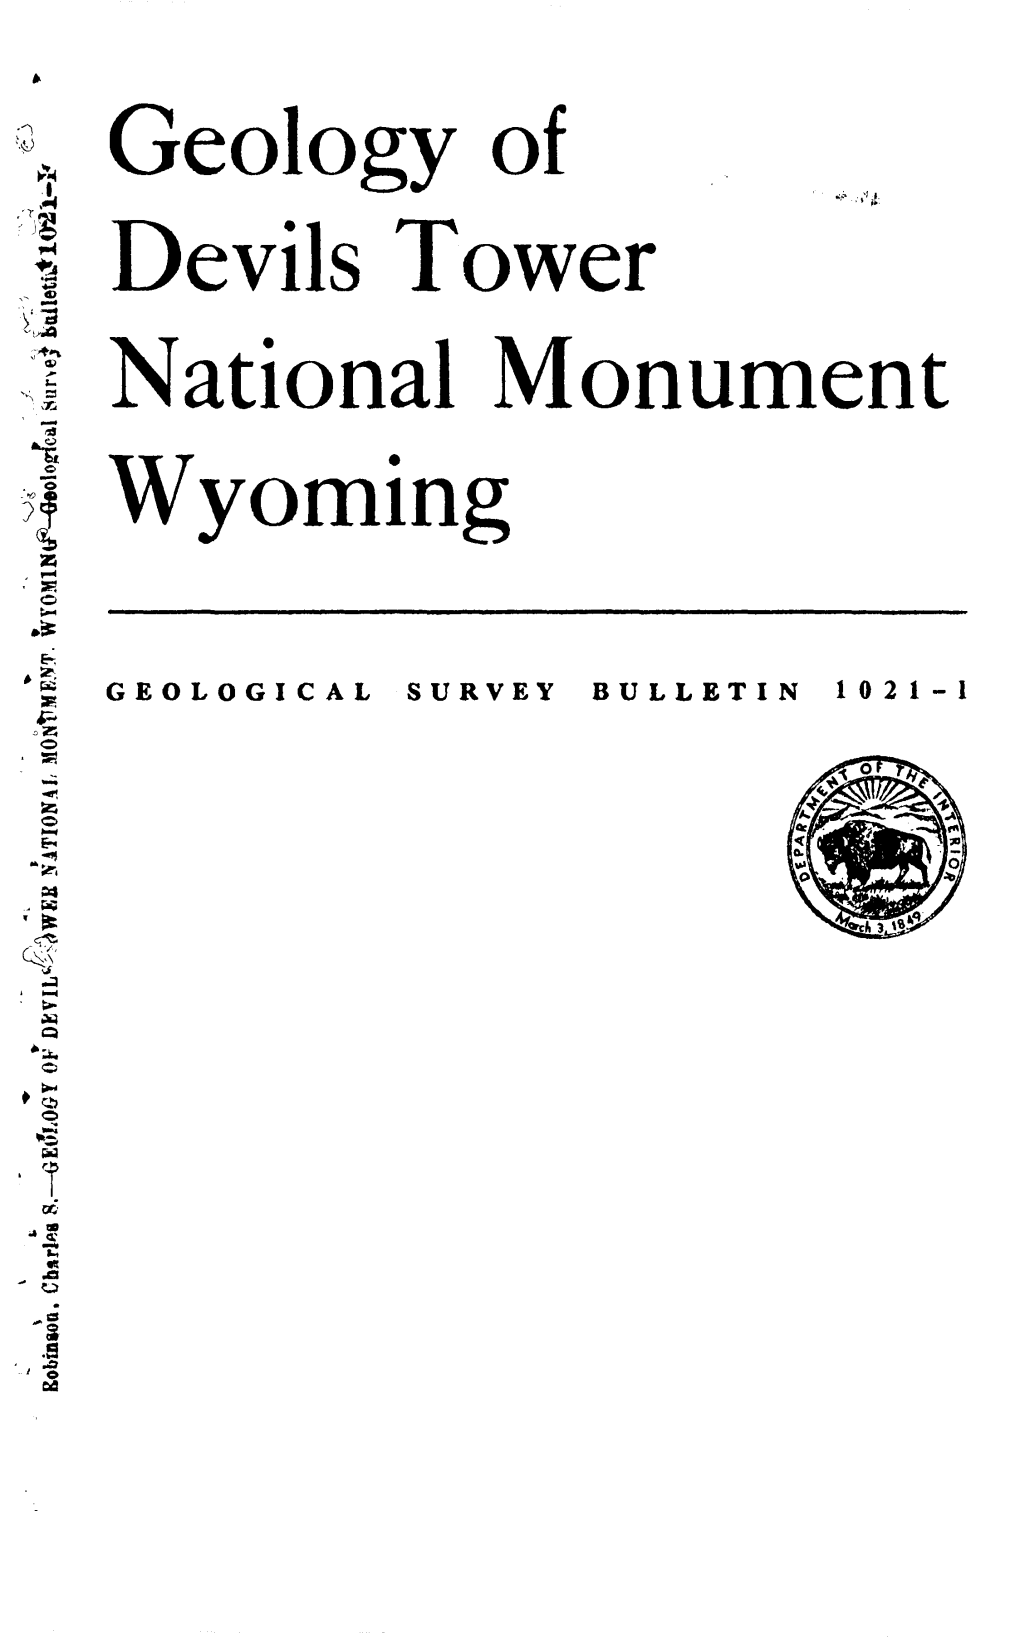 Geology of Devils Tower National Monument Wyoming